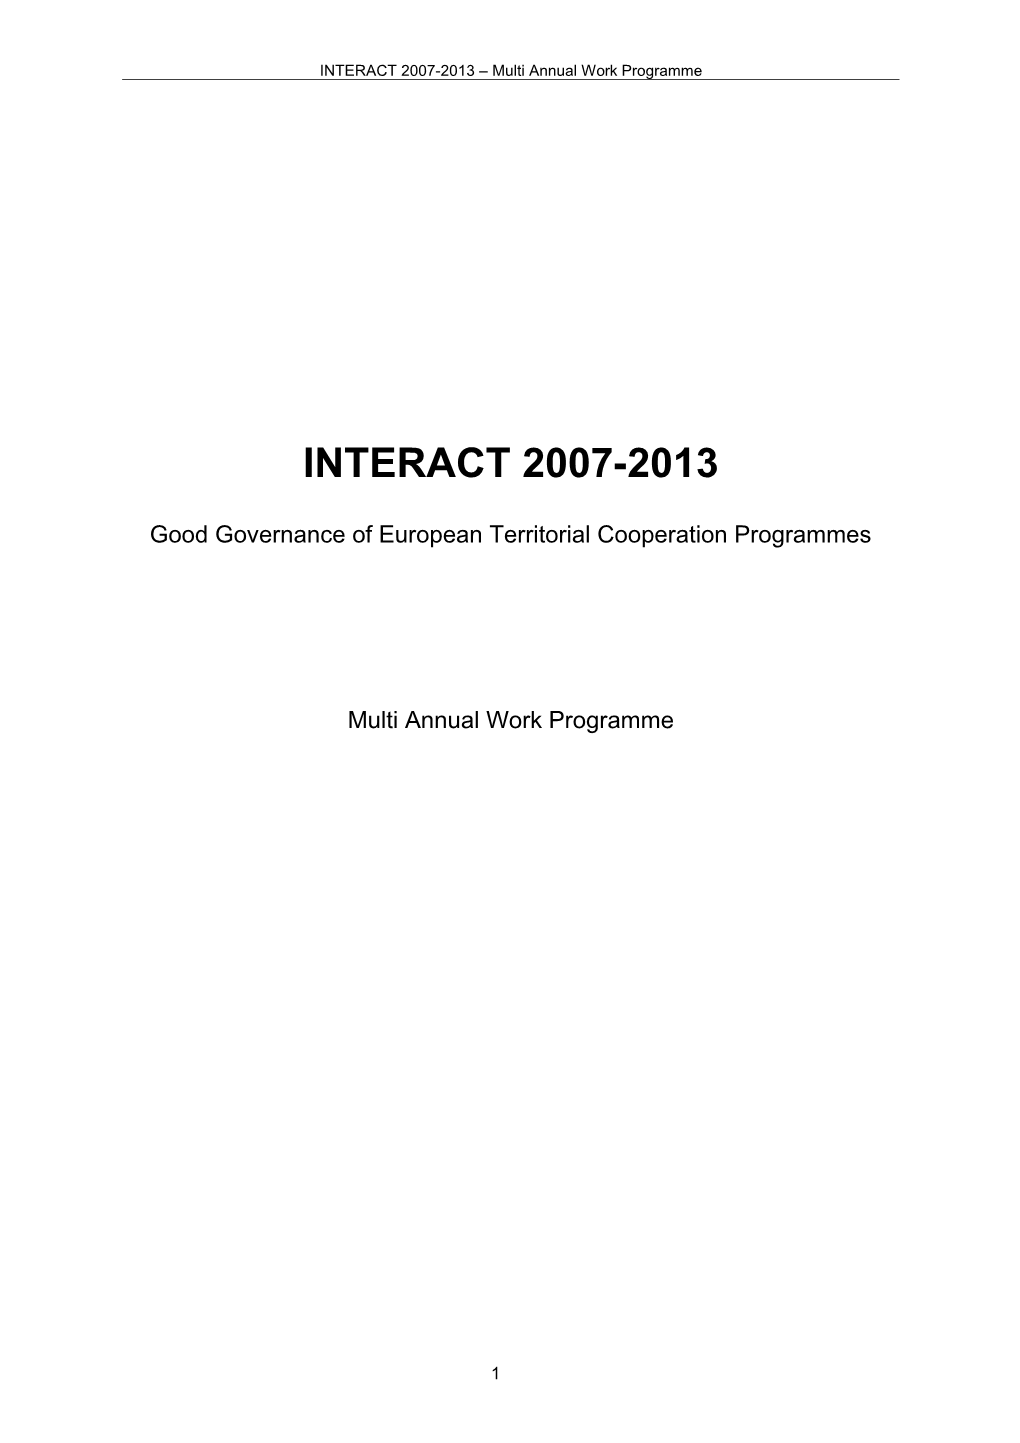 Programme Document and Multiannual Work Programme